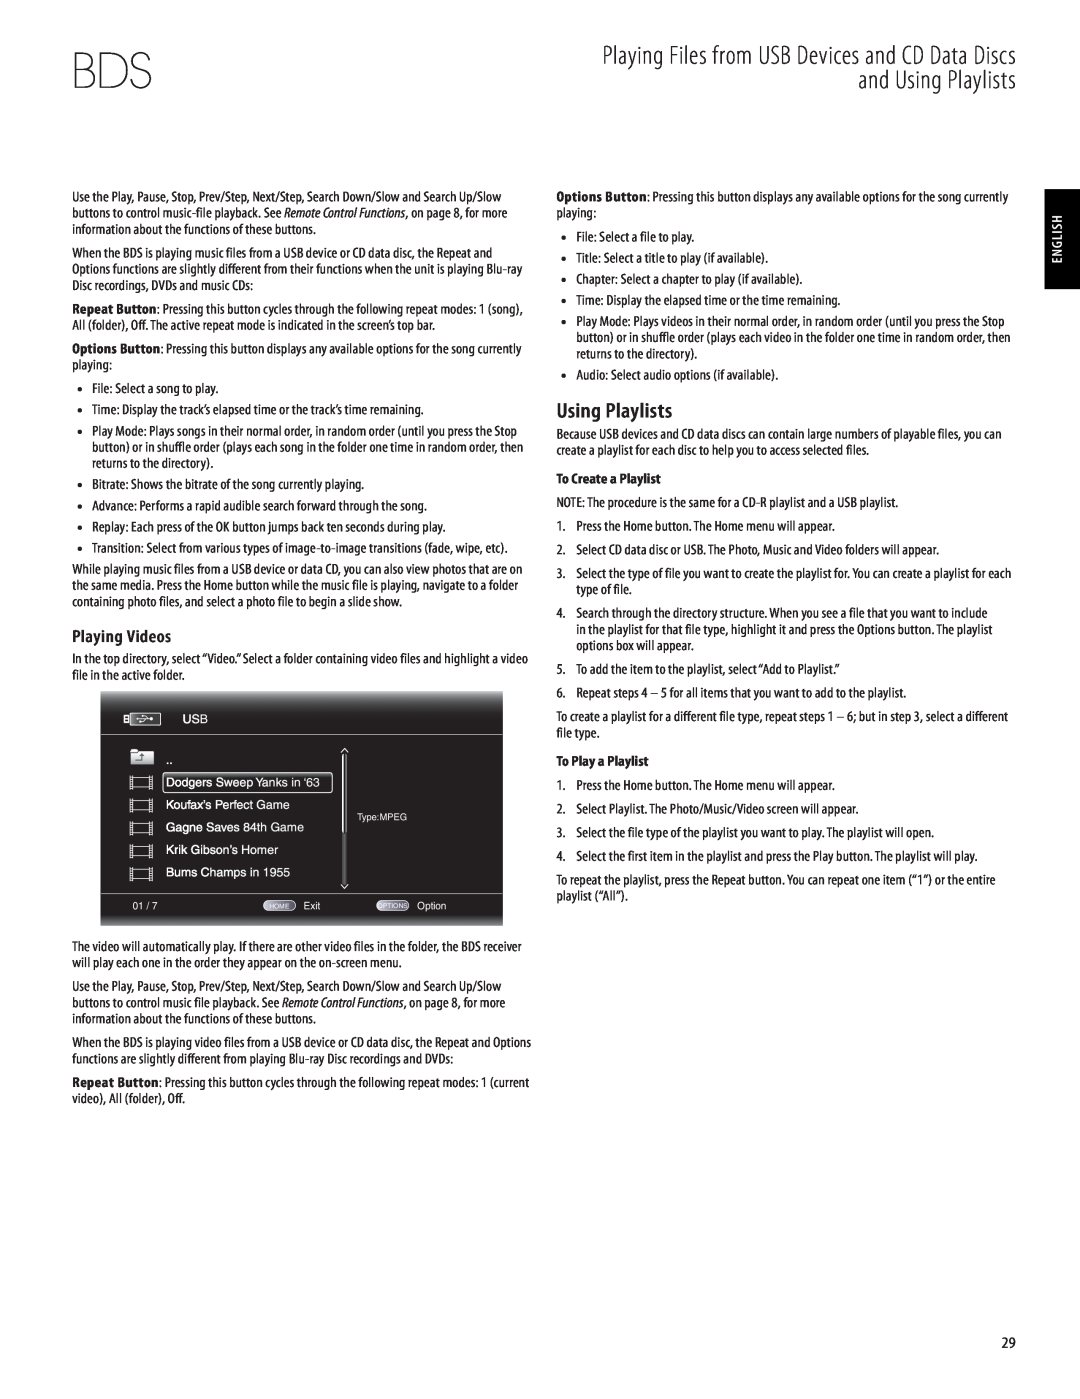 Harman-Kardon 950-0321-001 owner manual Using Playlists, Playing Videos, English, To Create a Playlist, To Play a Playlist 